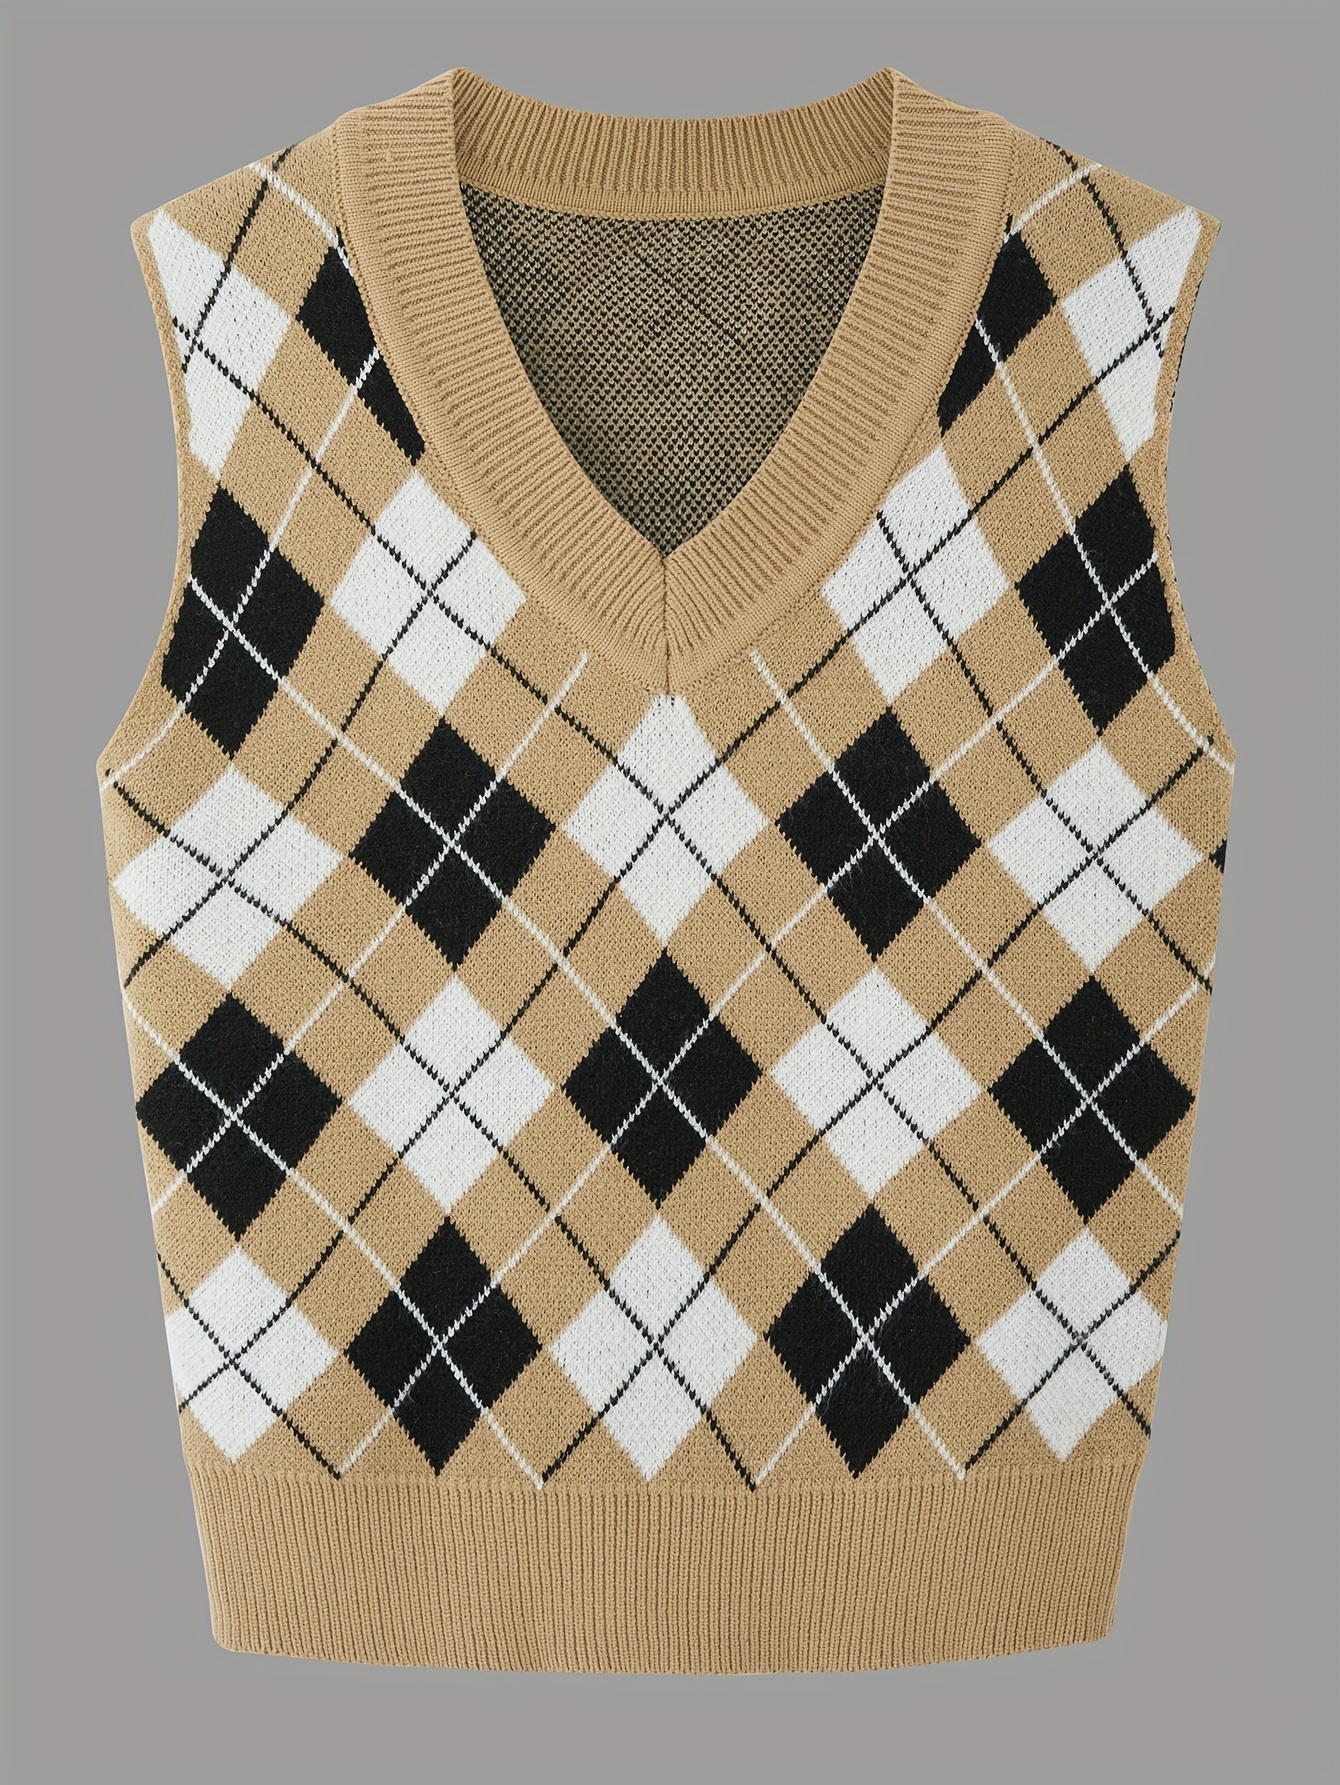 Argyle Pattern Crop Sweater Vest, Sleeveless V Neck Casual Sweater For  Spring & Fall, Women's Clothing